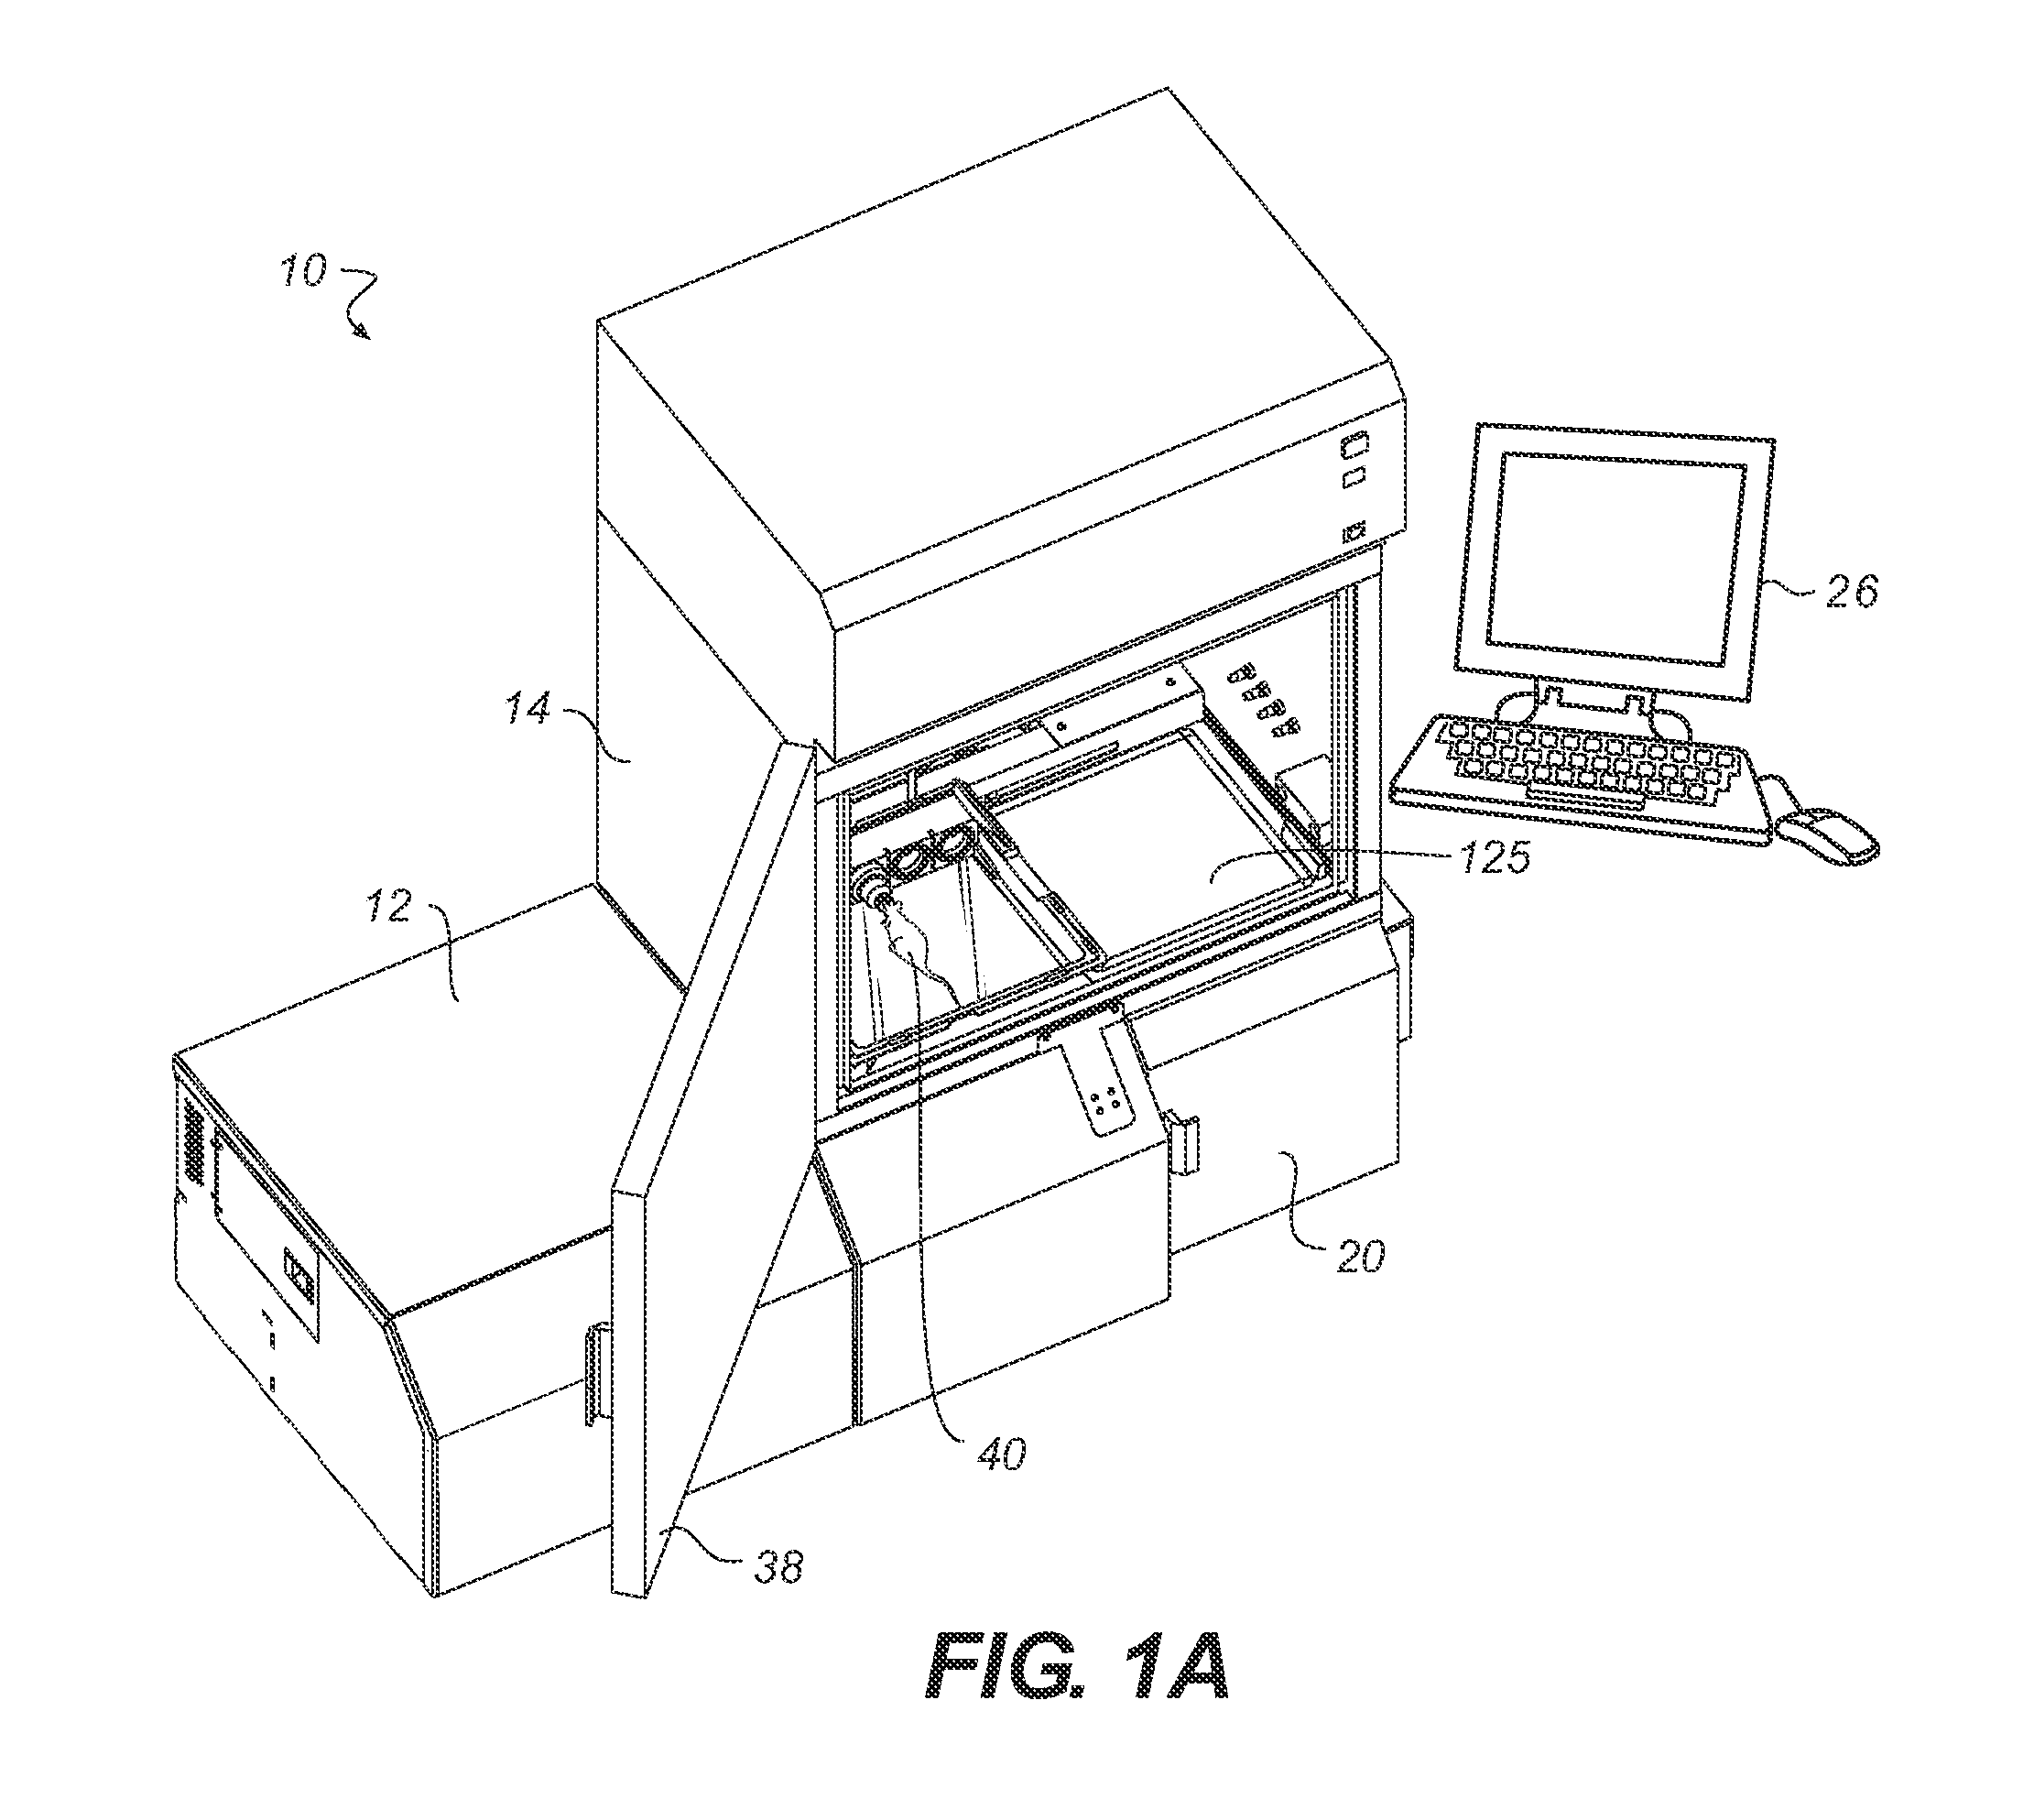 Apparatus and method for multi-modal imaging using multiple x-ray sources